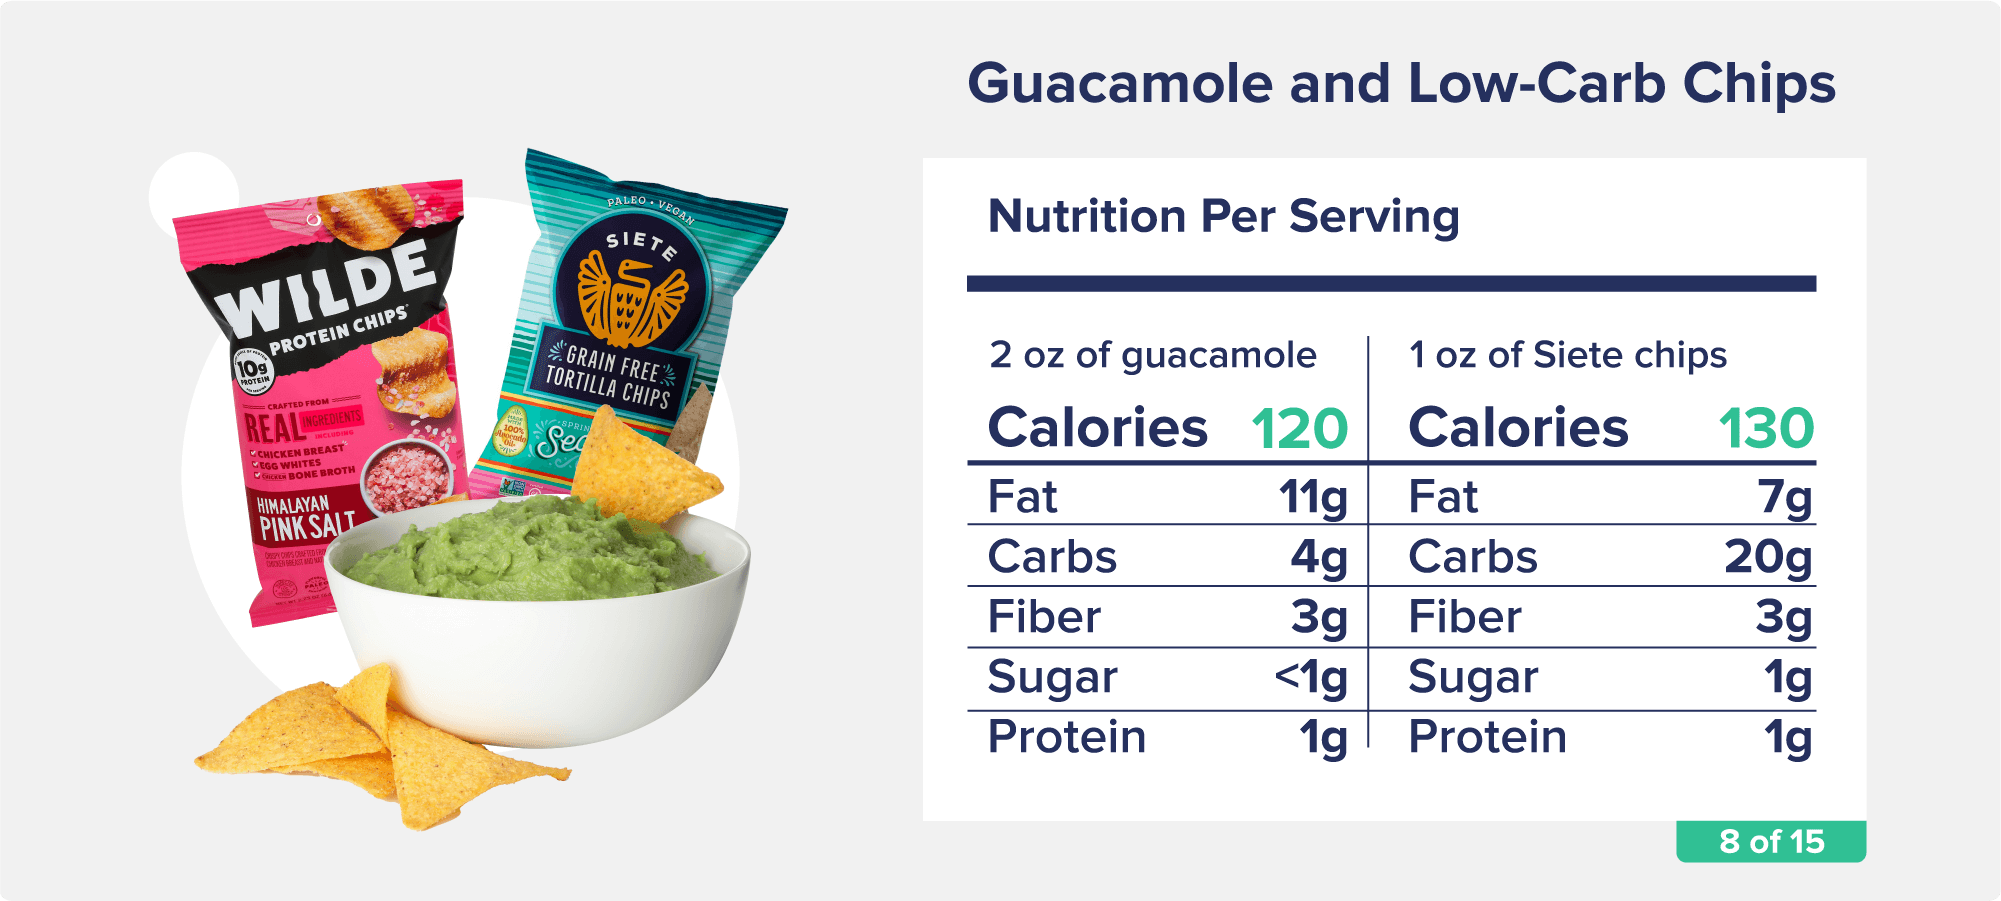 A bag of Wilde Protein Chips, a bag of Siete Grain-Free Tortilla Chips, and a bowl of guacamole dip pictured with accompanying nutrition facts like calories, fat, and protein.